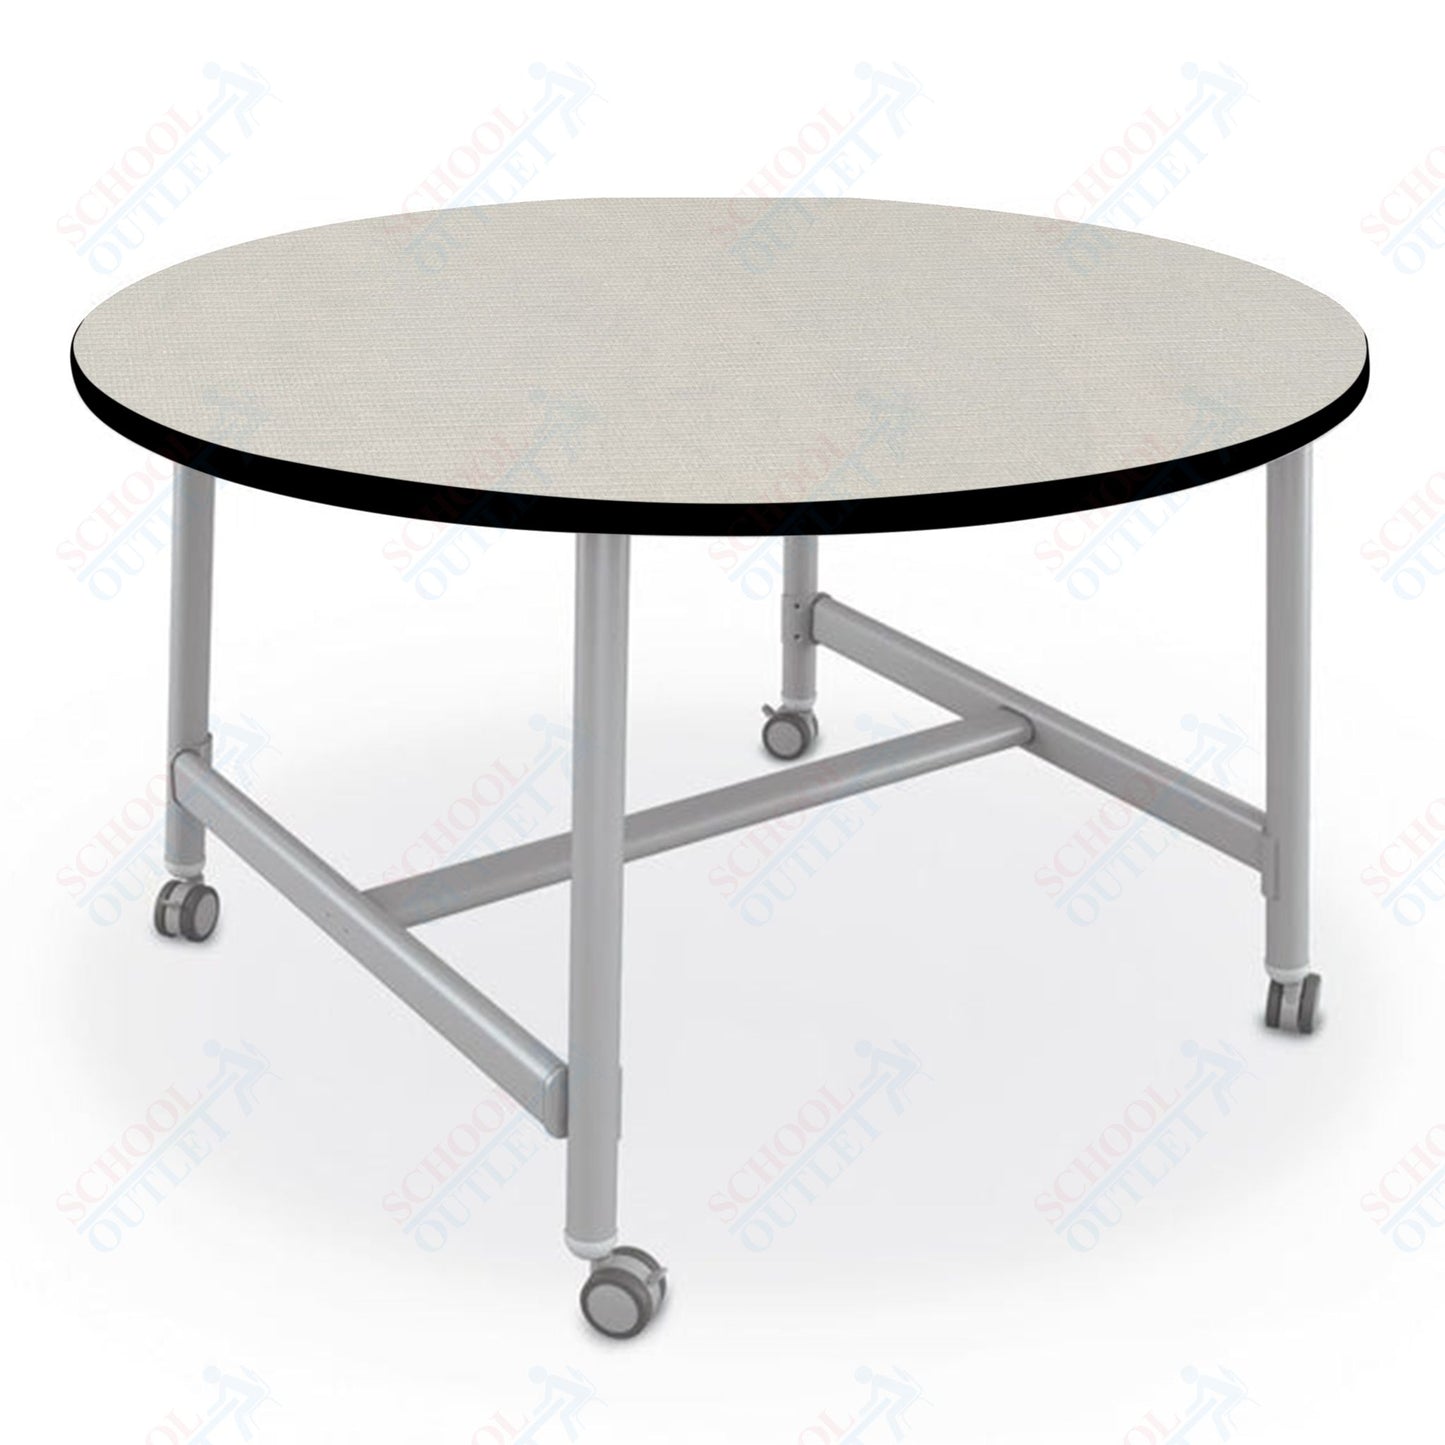 Mooreco Akt Table – 60" Round, Laminate Top, Fixed Height Available in 29"H, 36"H, or 42"H